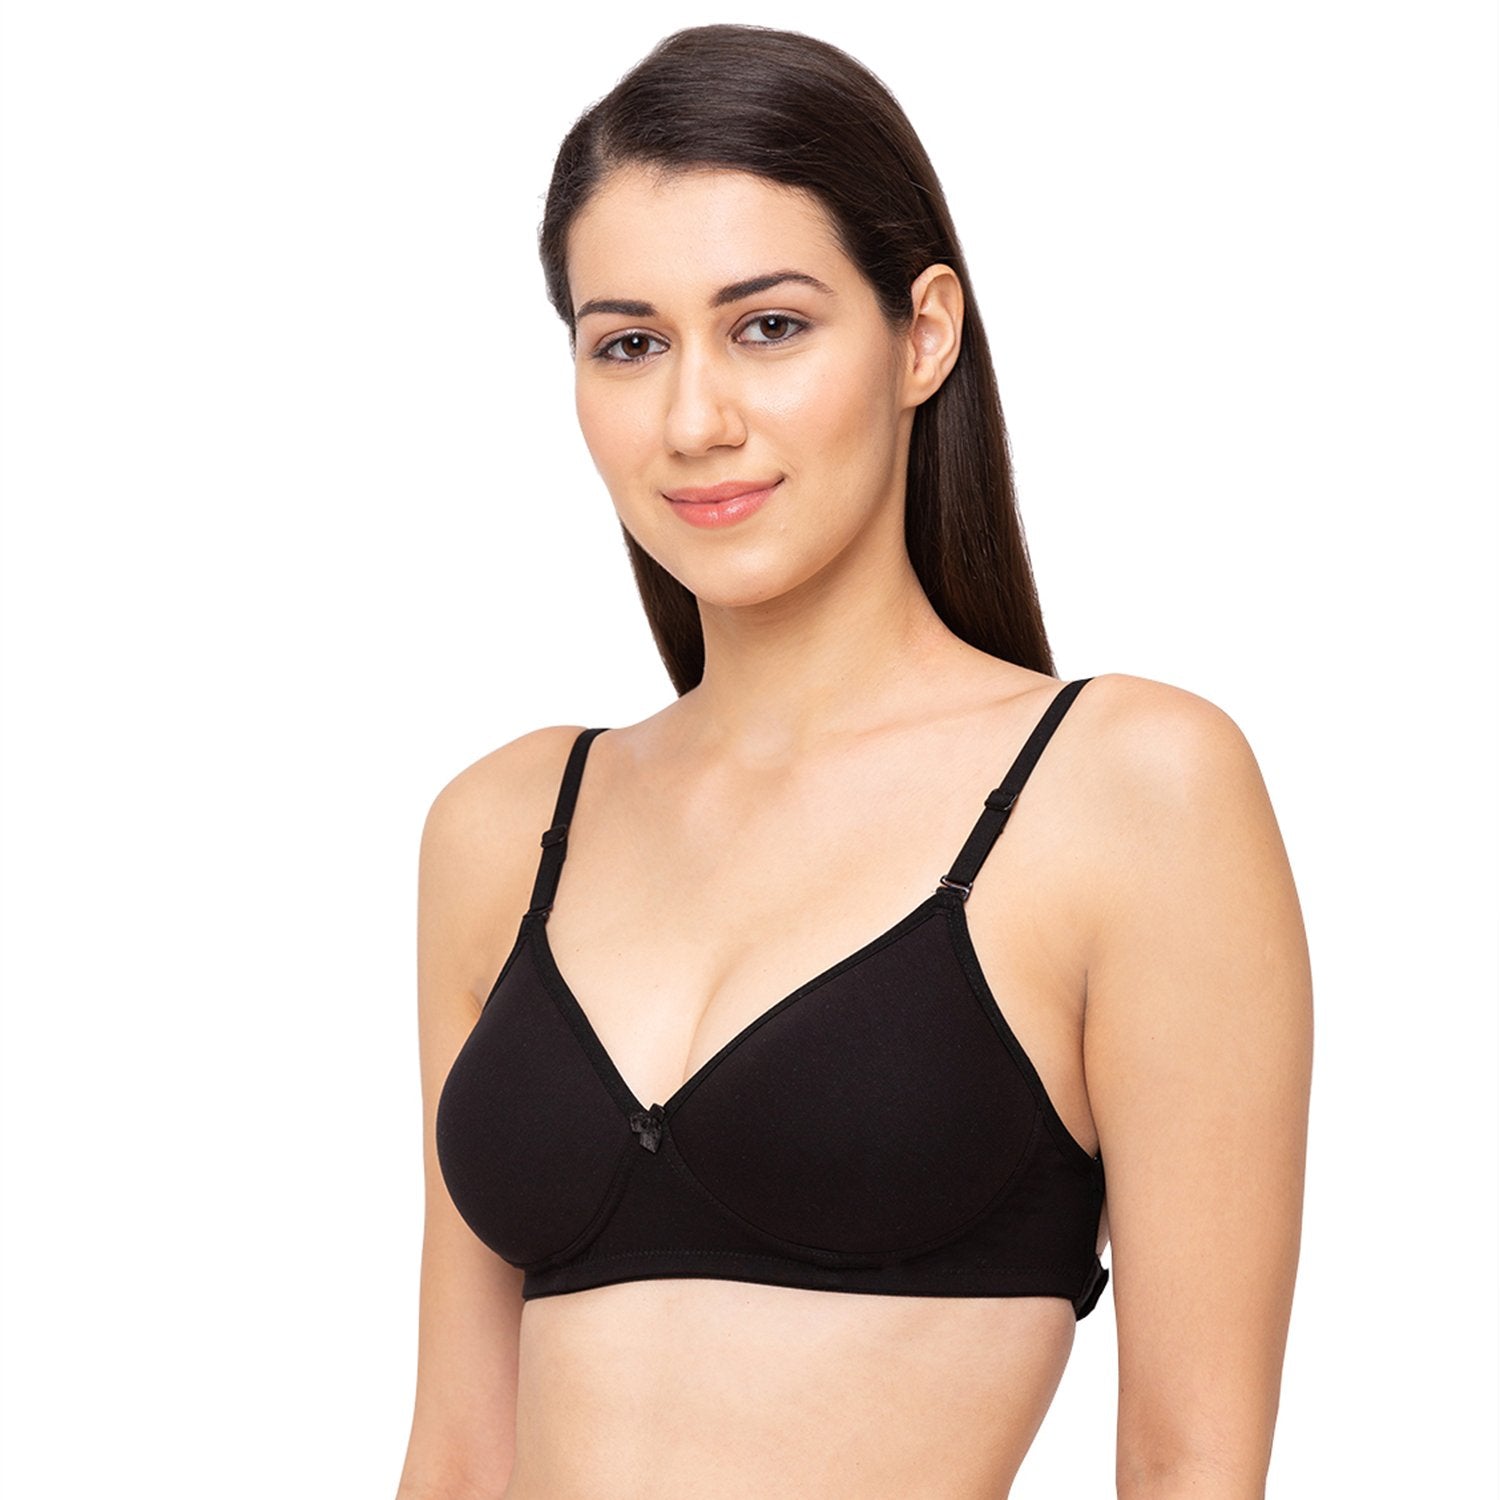 Belle Lingeries on X: Buy #Souminie cotton bras in A.B.C.D cup sizes,  starting Rs. 110 @   / X